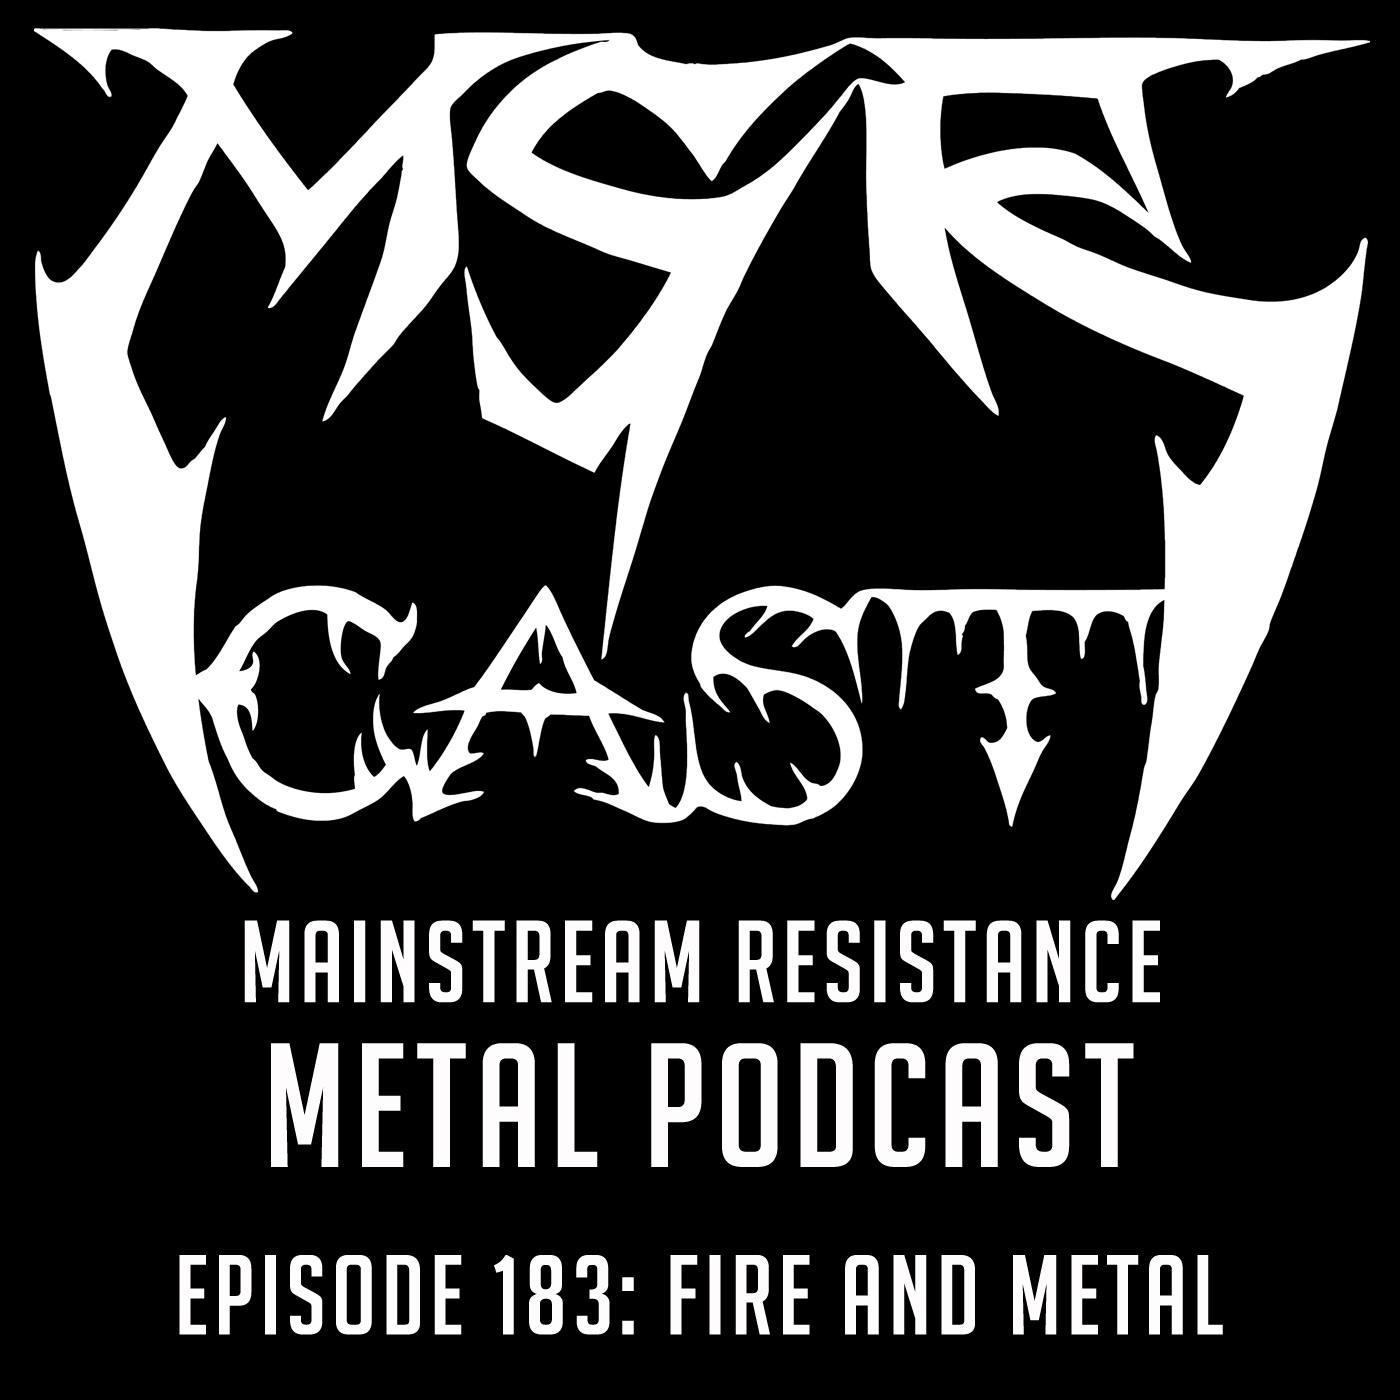 MSRcast 183: Fire And Metal